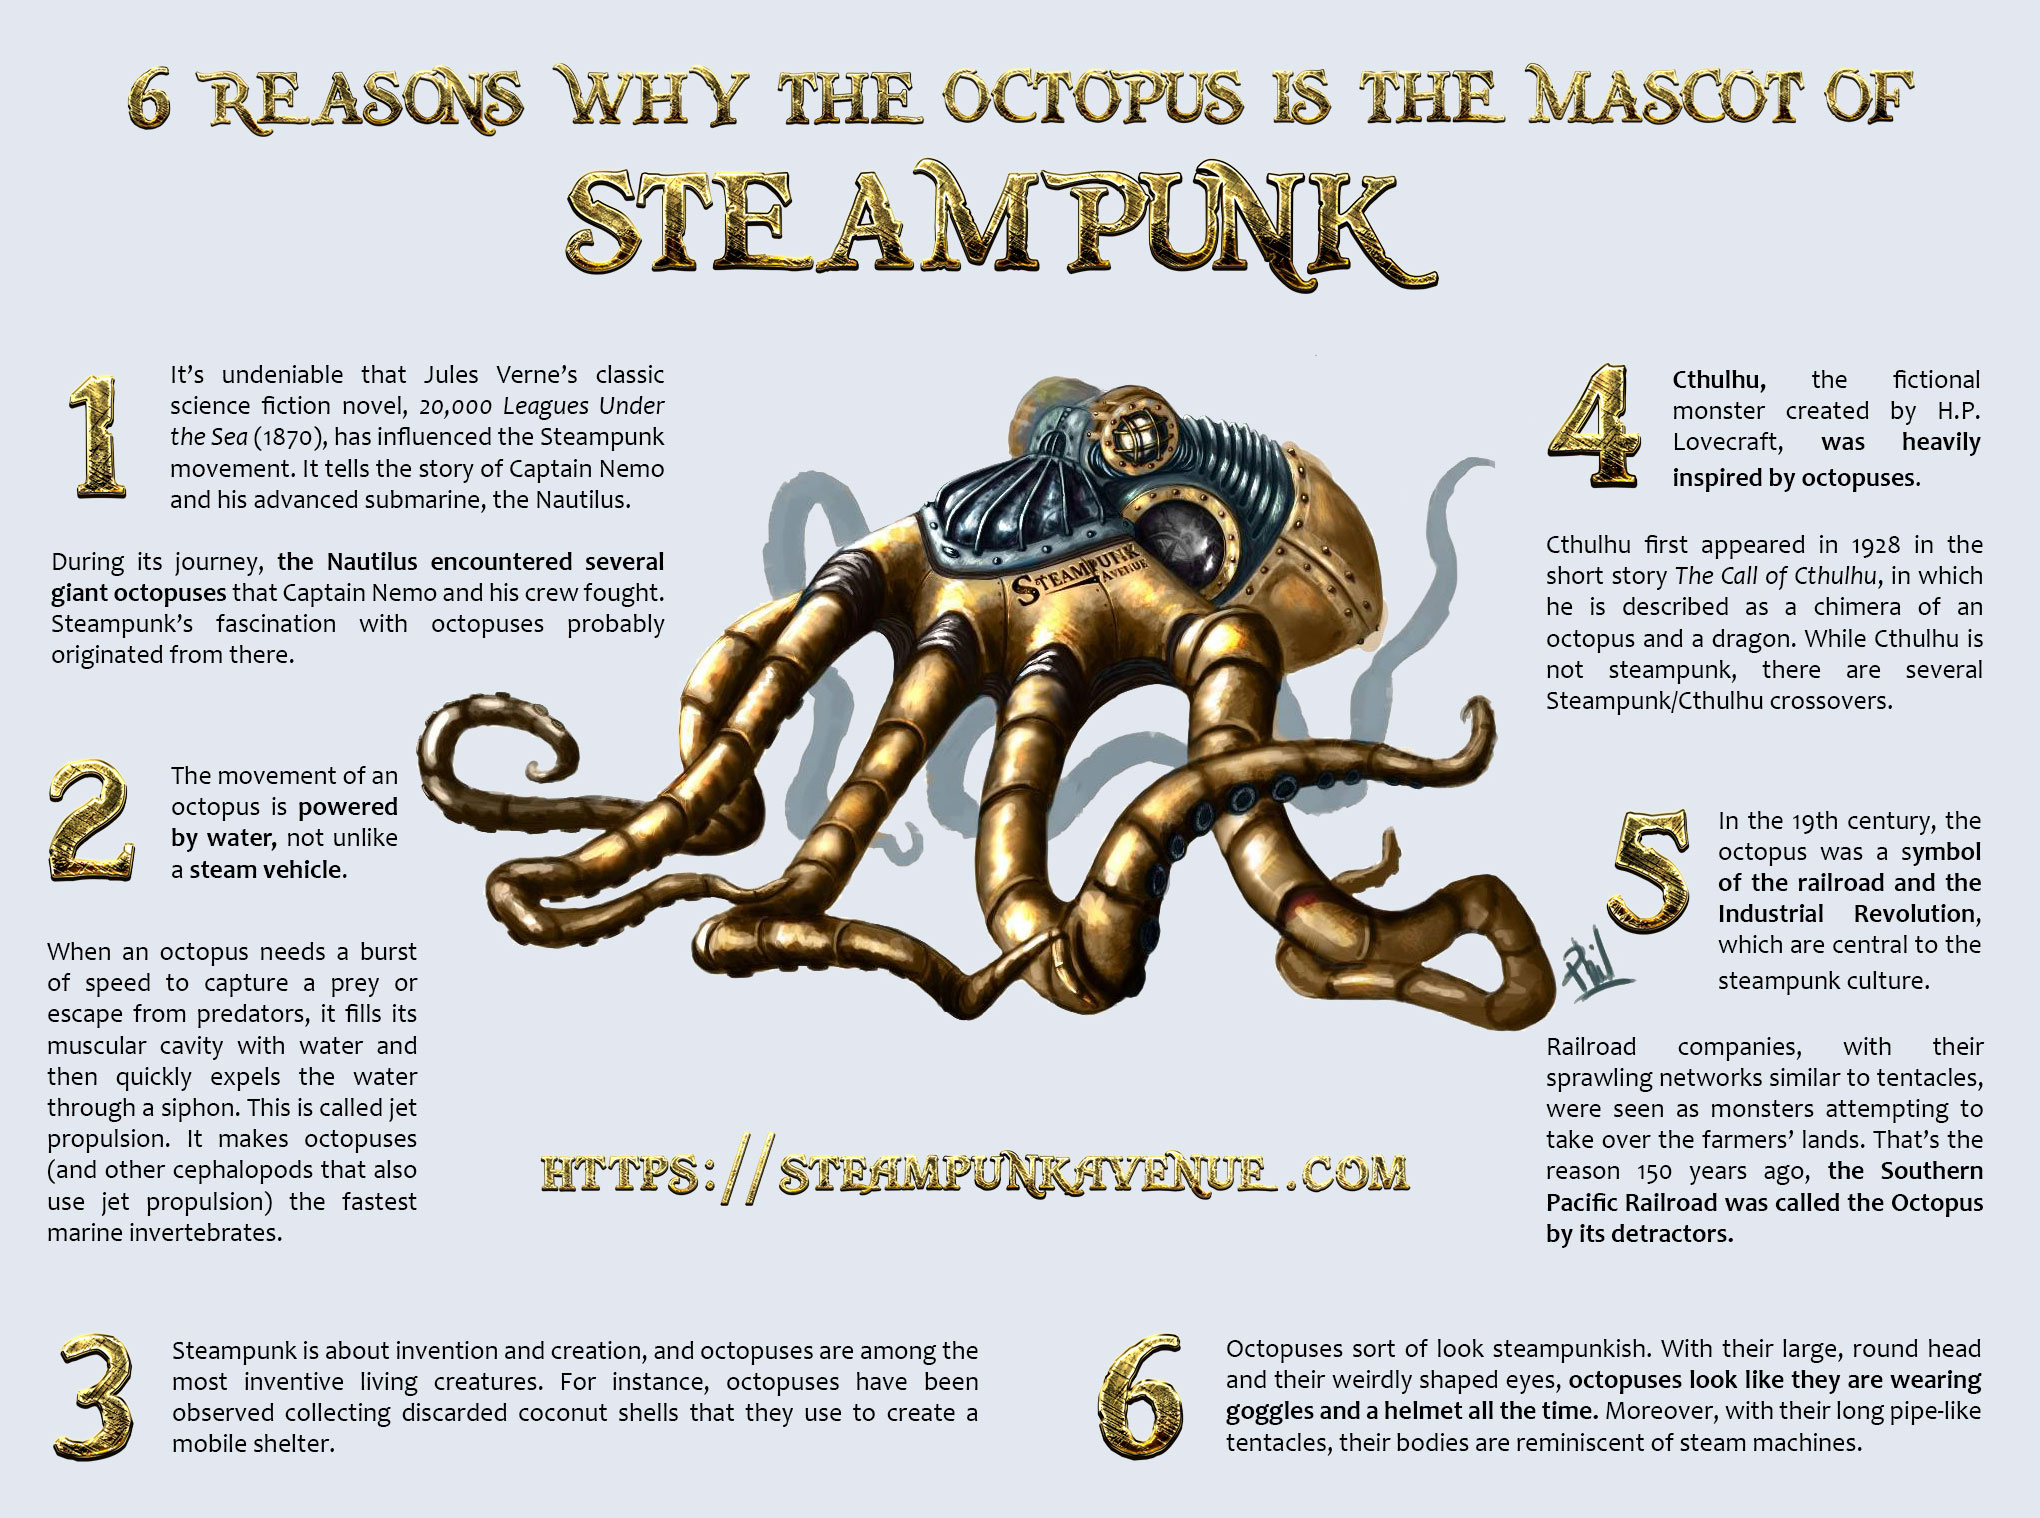 6 Reasons Why the Octopus Is the Mascot of Steampunk